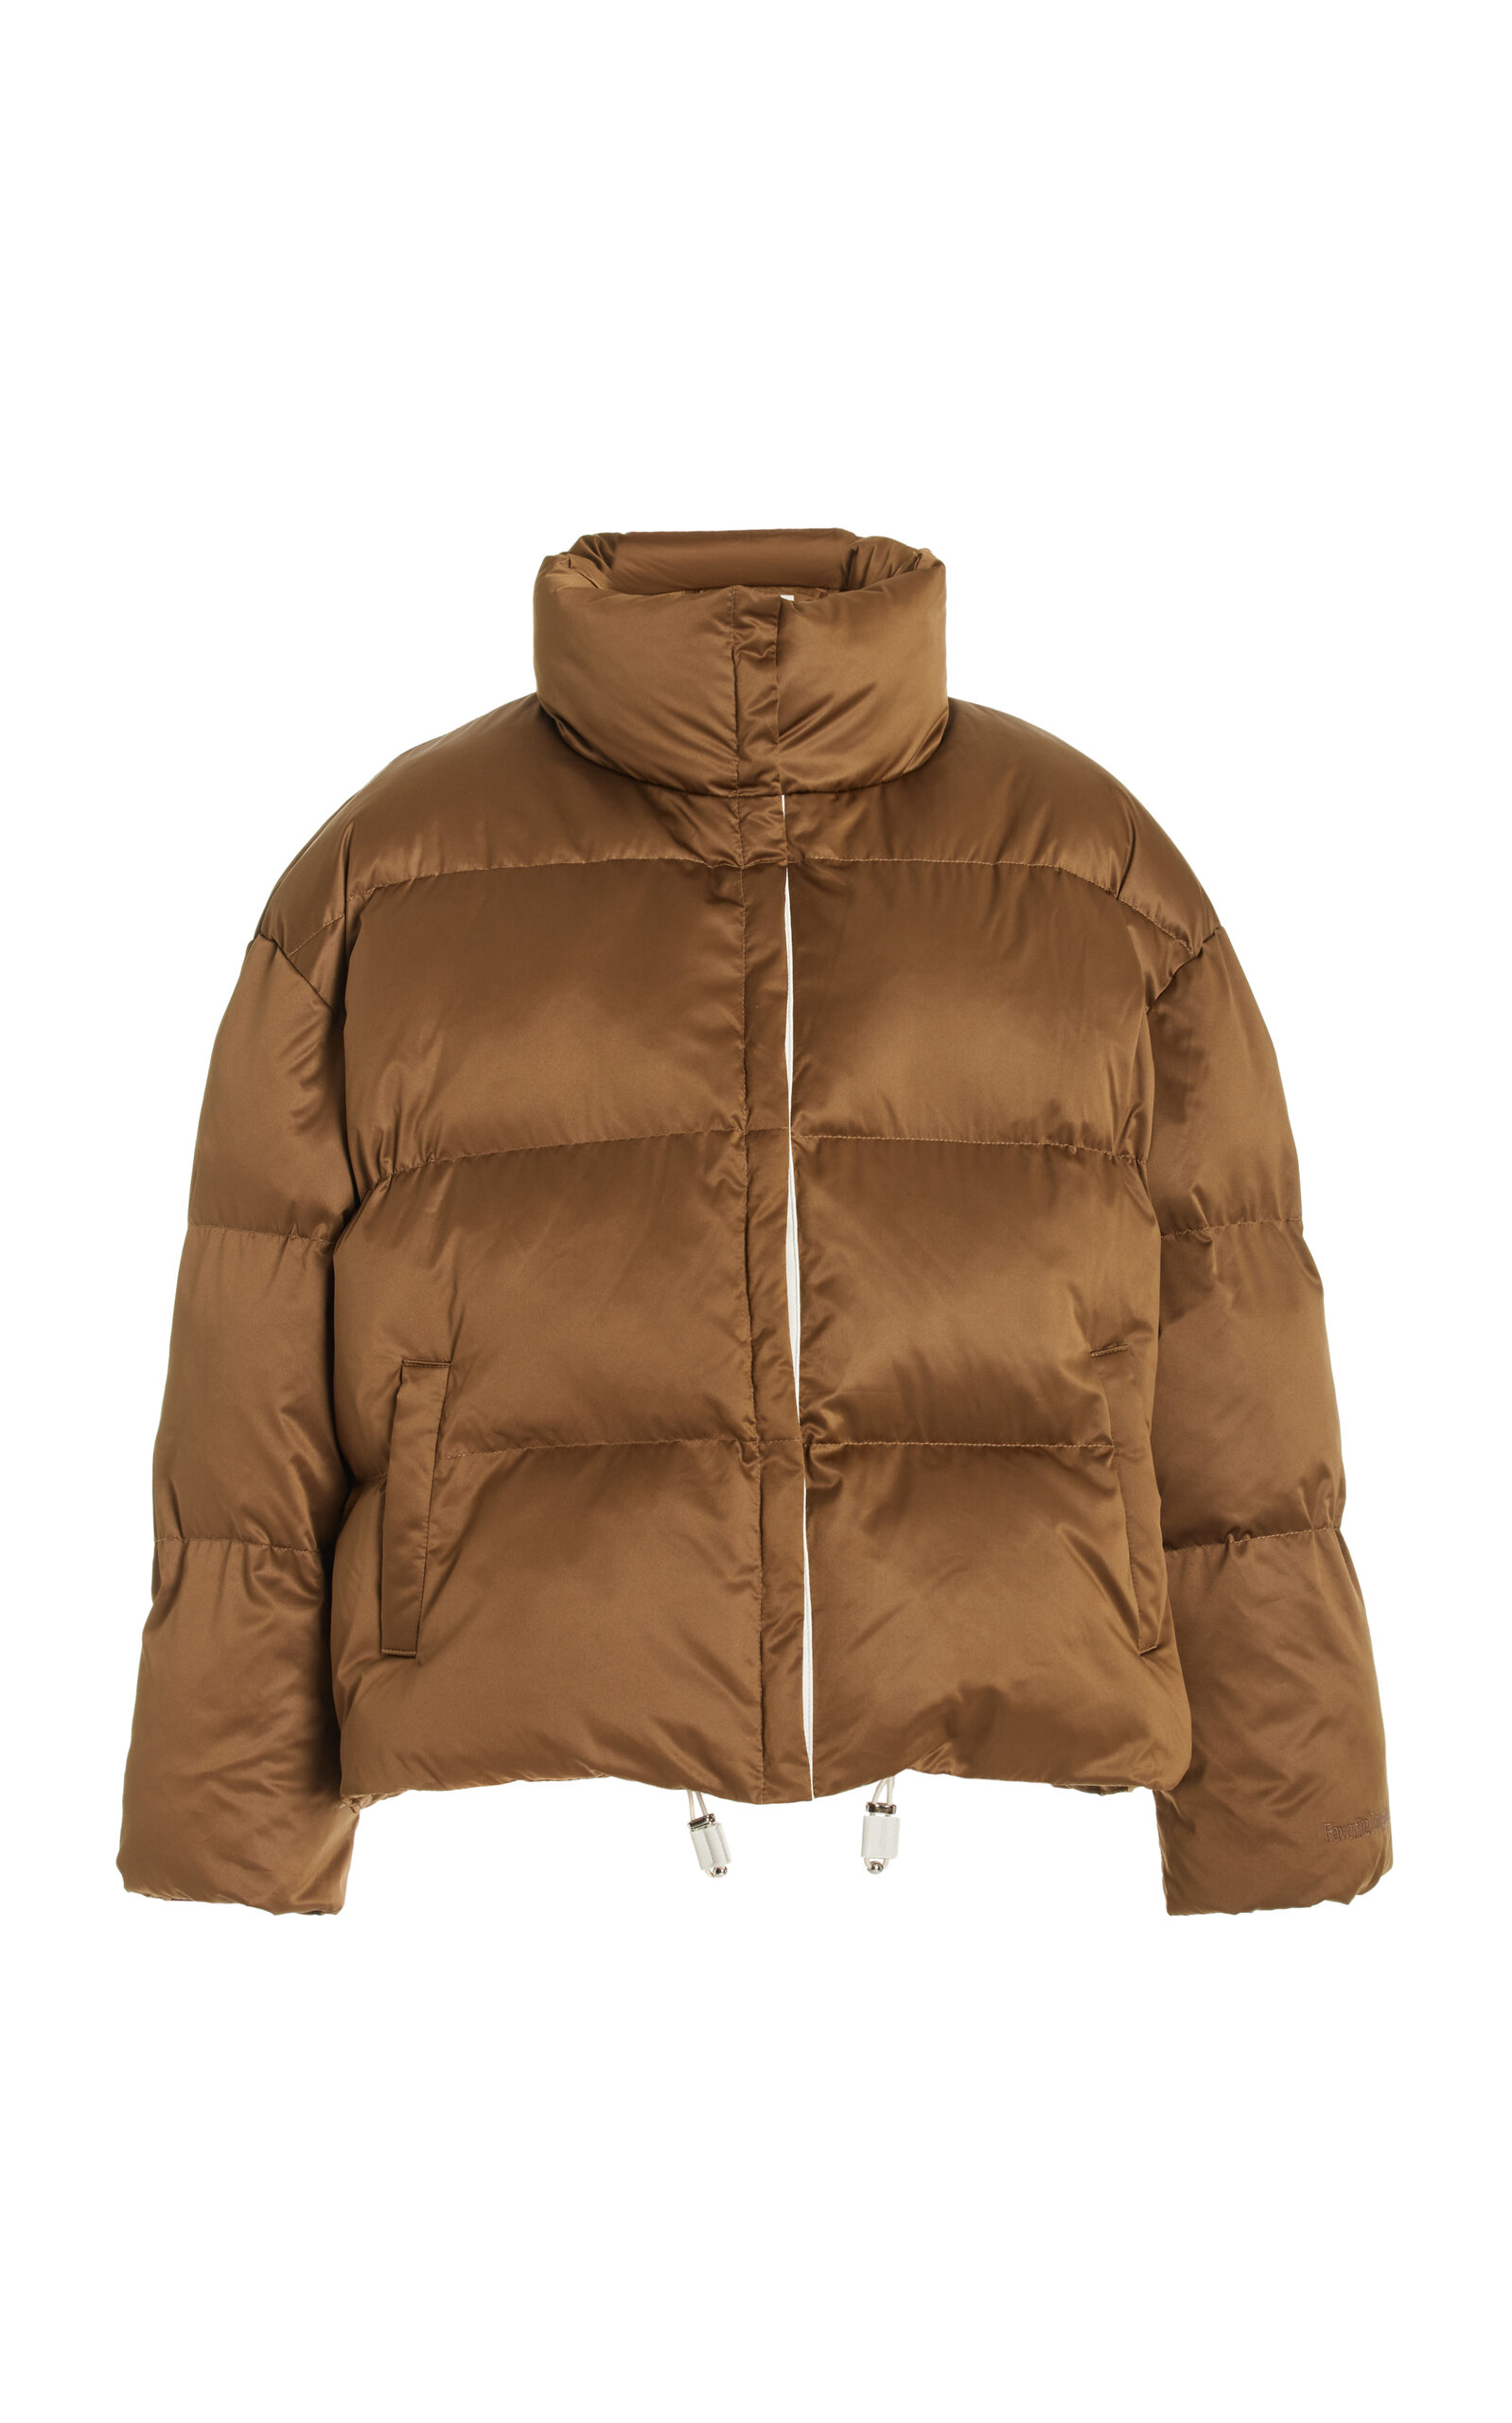 The Cropped Puffer Jacket